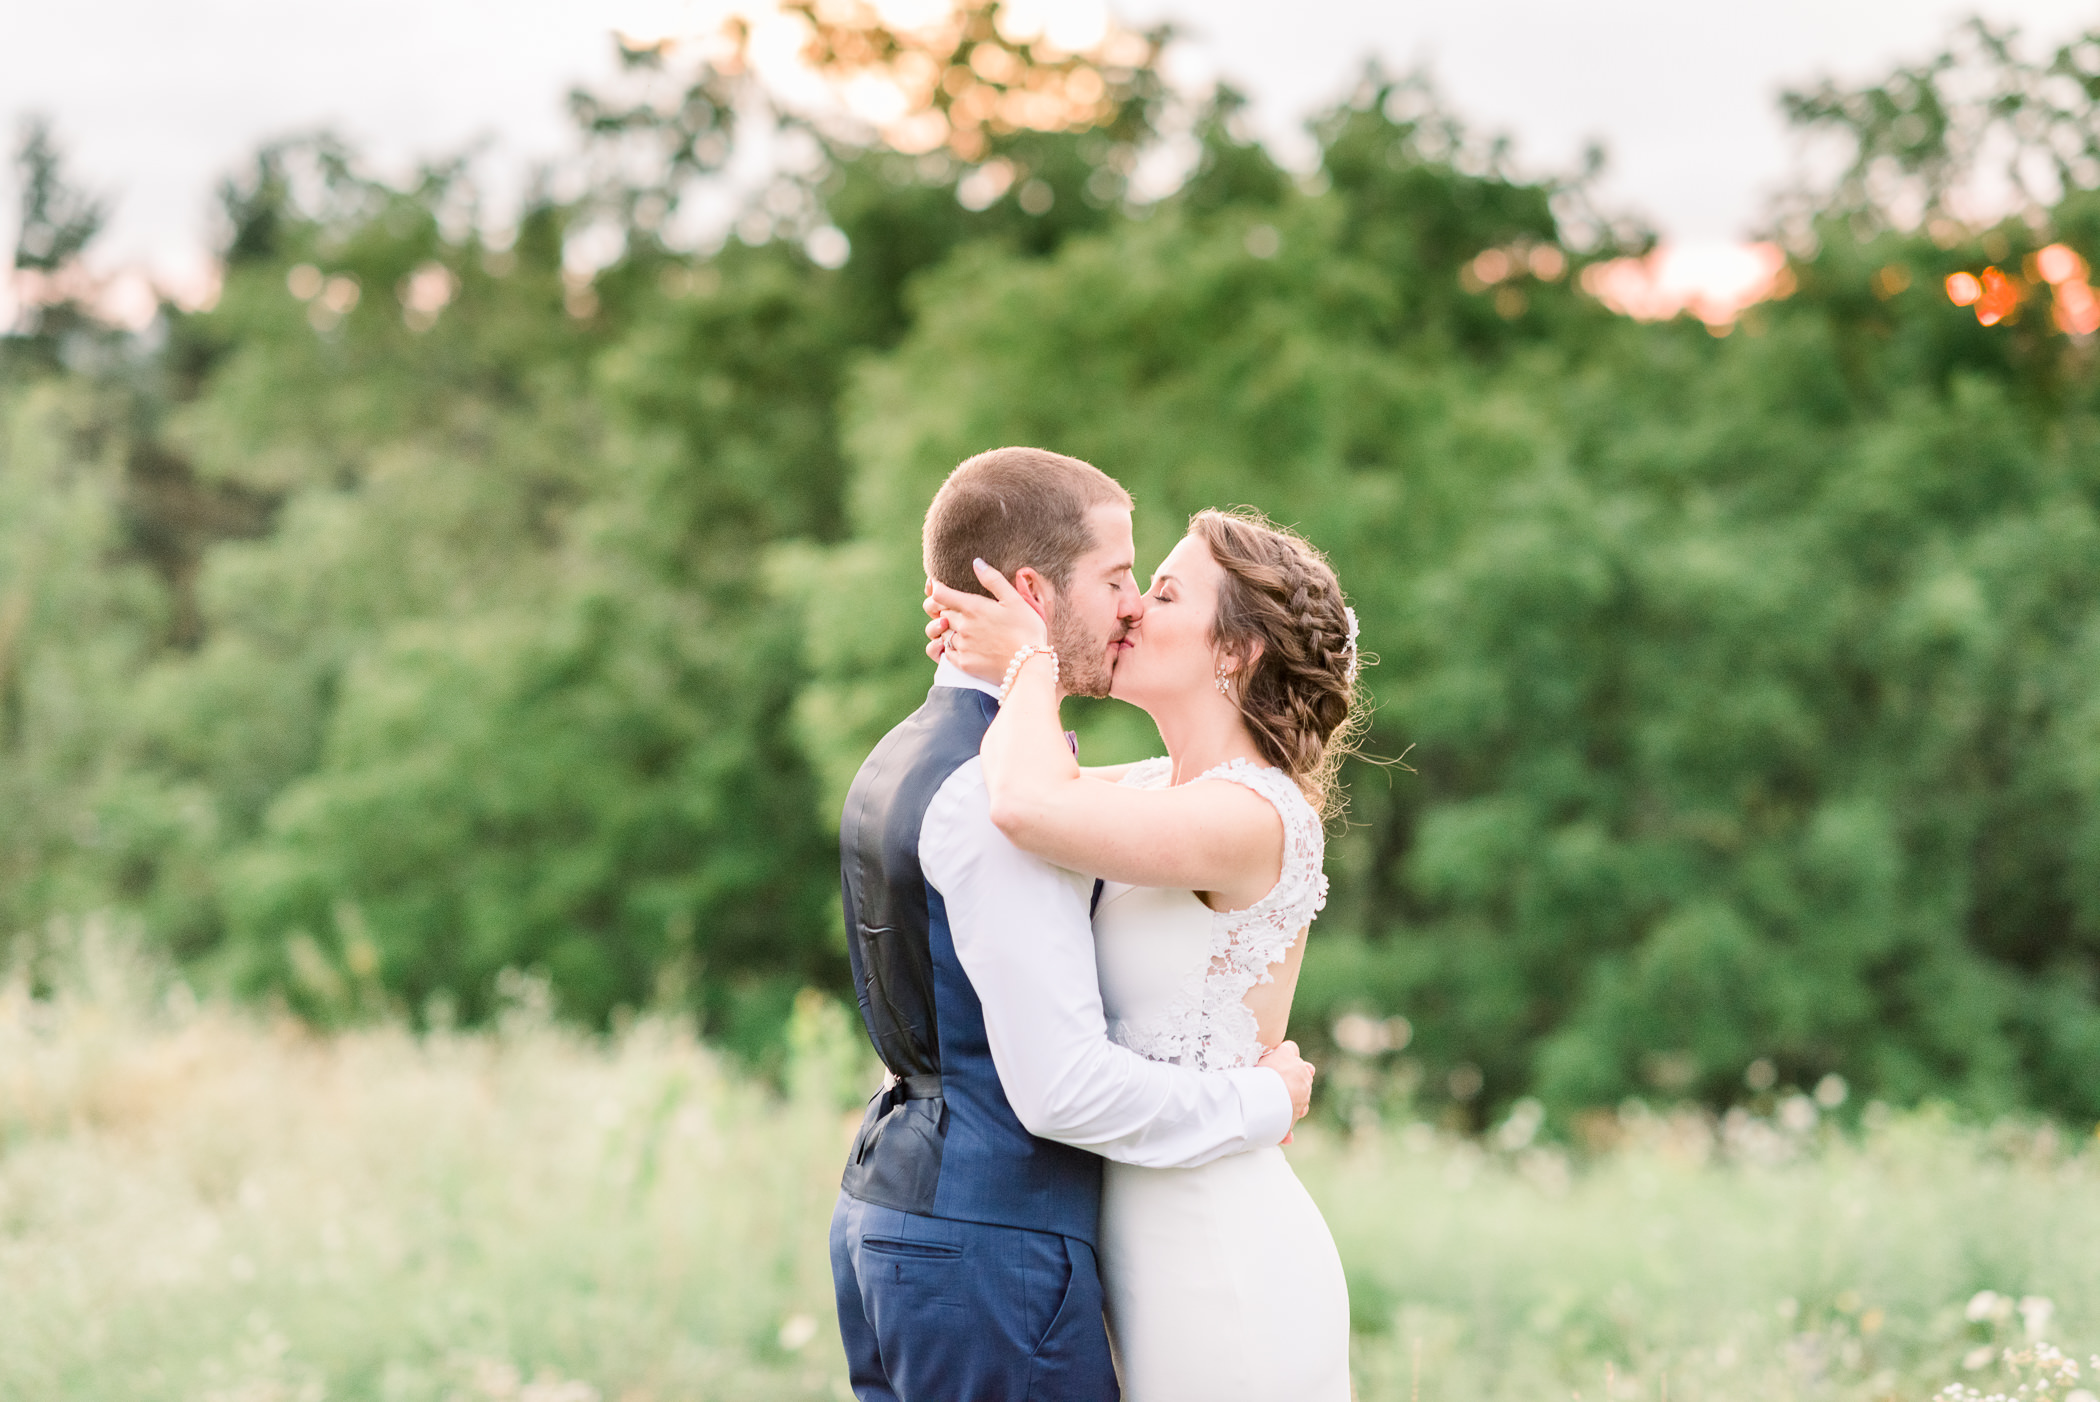 The Fields Reserve Wedding Day - Larissa Marie Photography